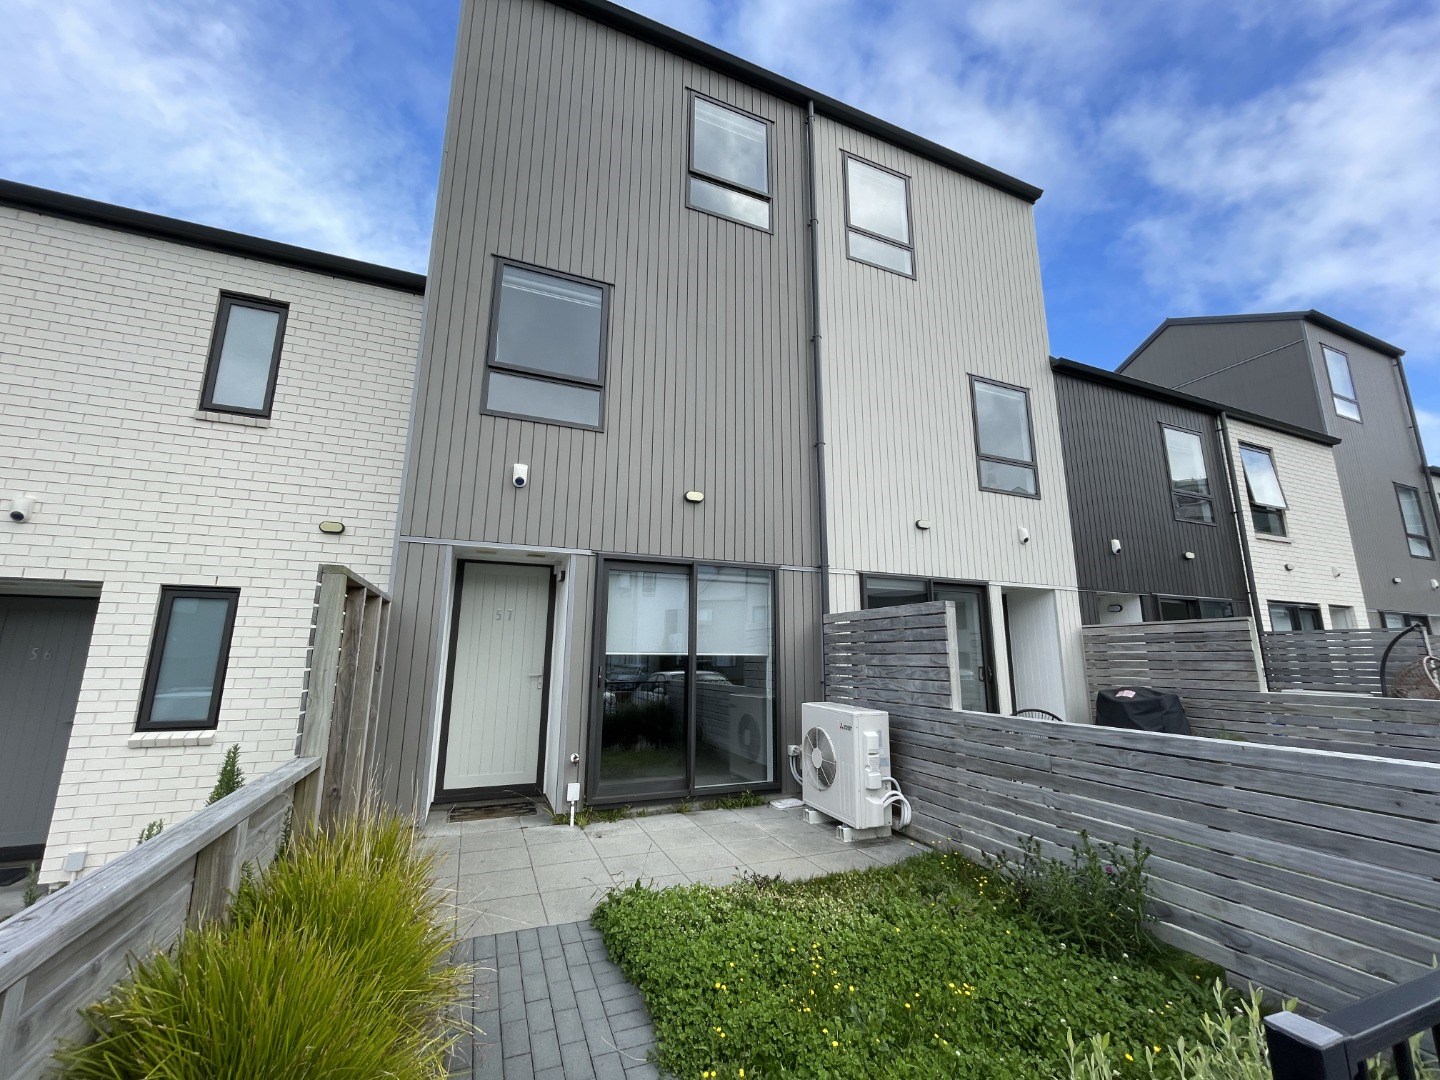 Real Estate For Rent Houses & Apartments : Near New, Sophisticated Johnsonville Townhouse, Wellington